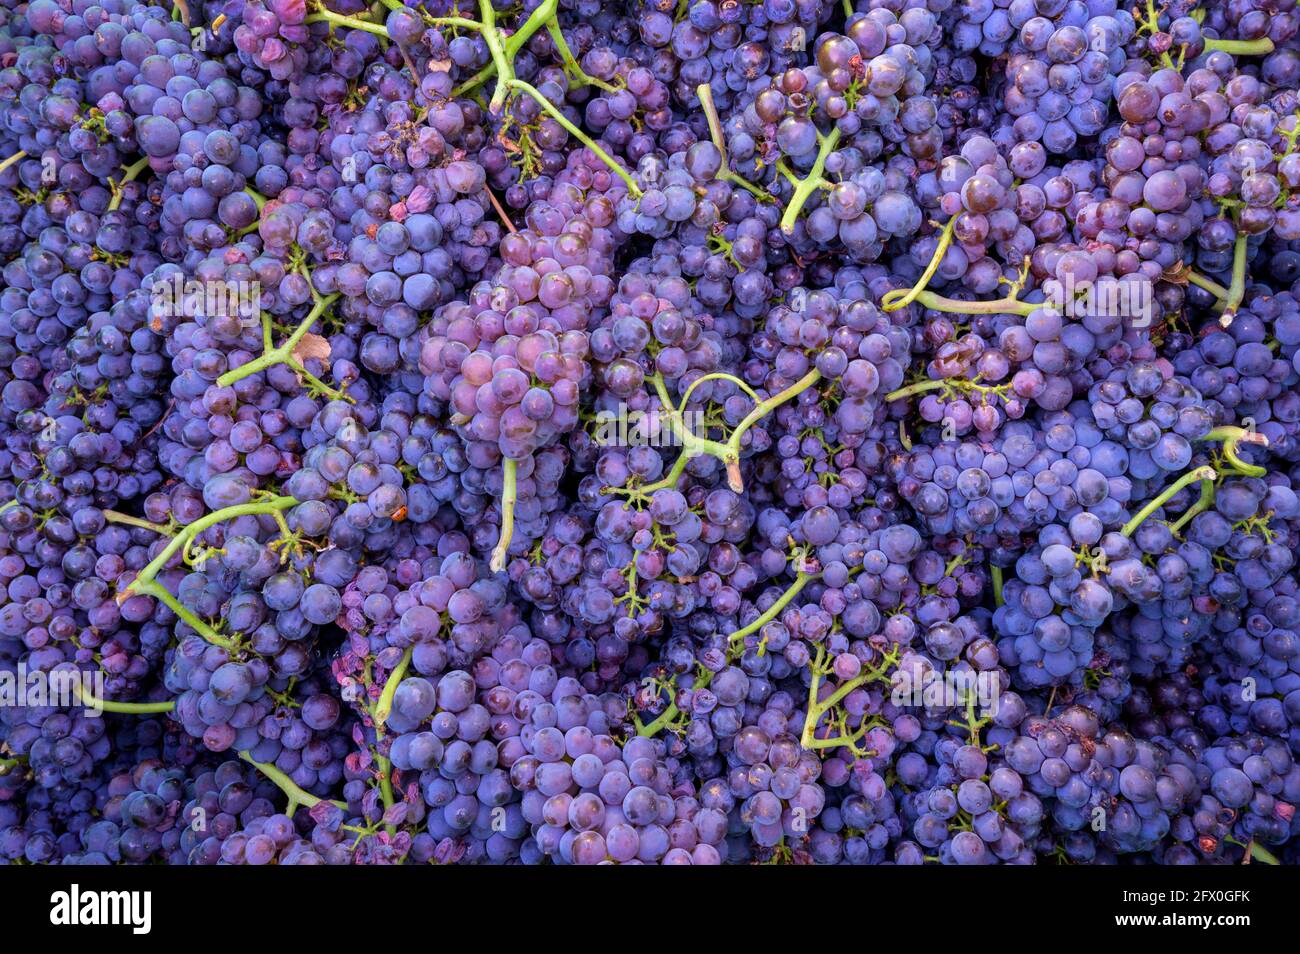 Blue grapes and vines harvest for winemaking, Neuweier, Black forest, Germany. Stock Photo